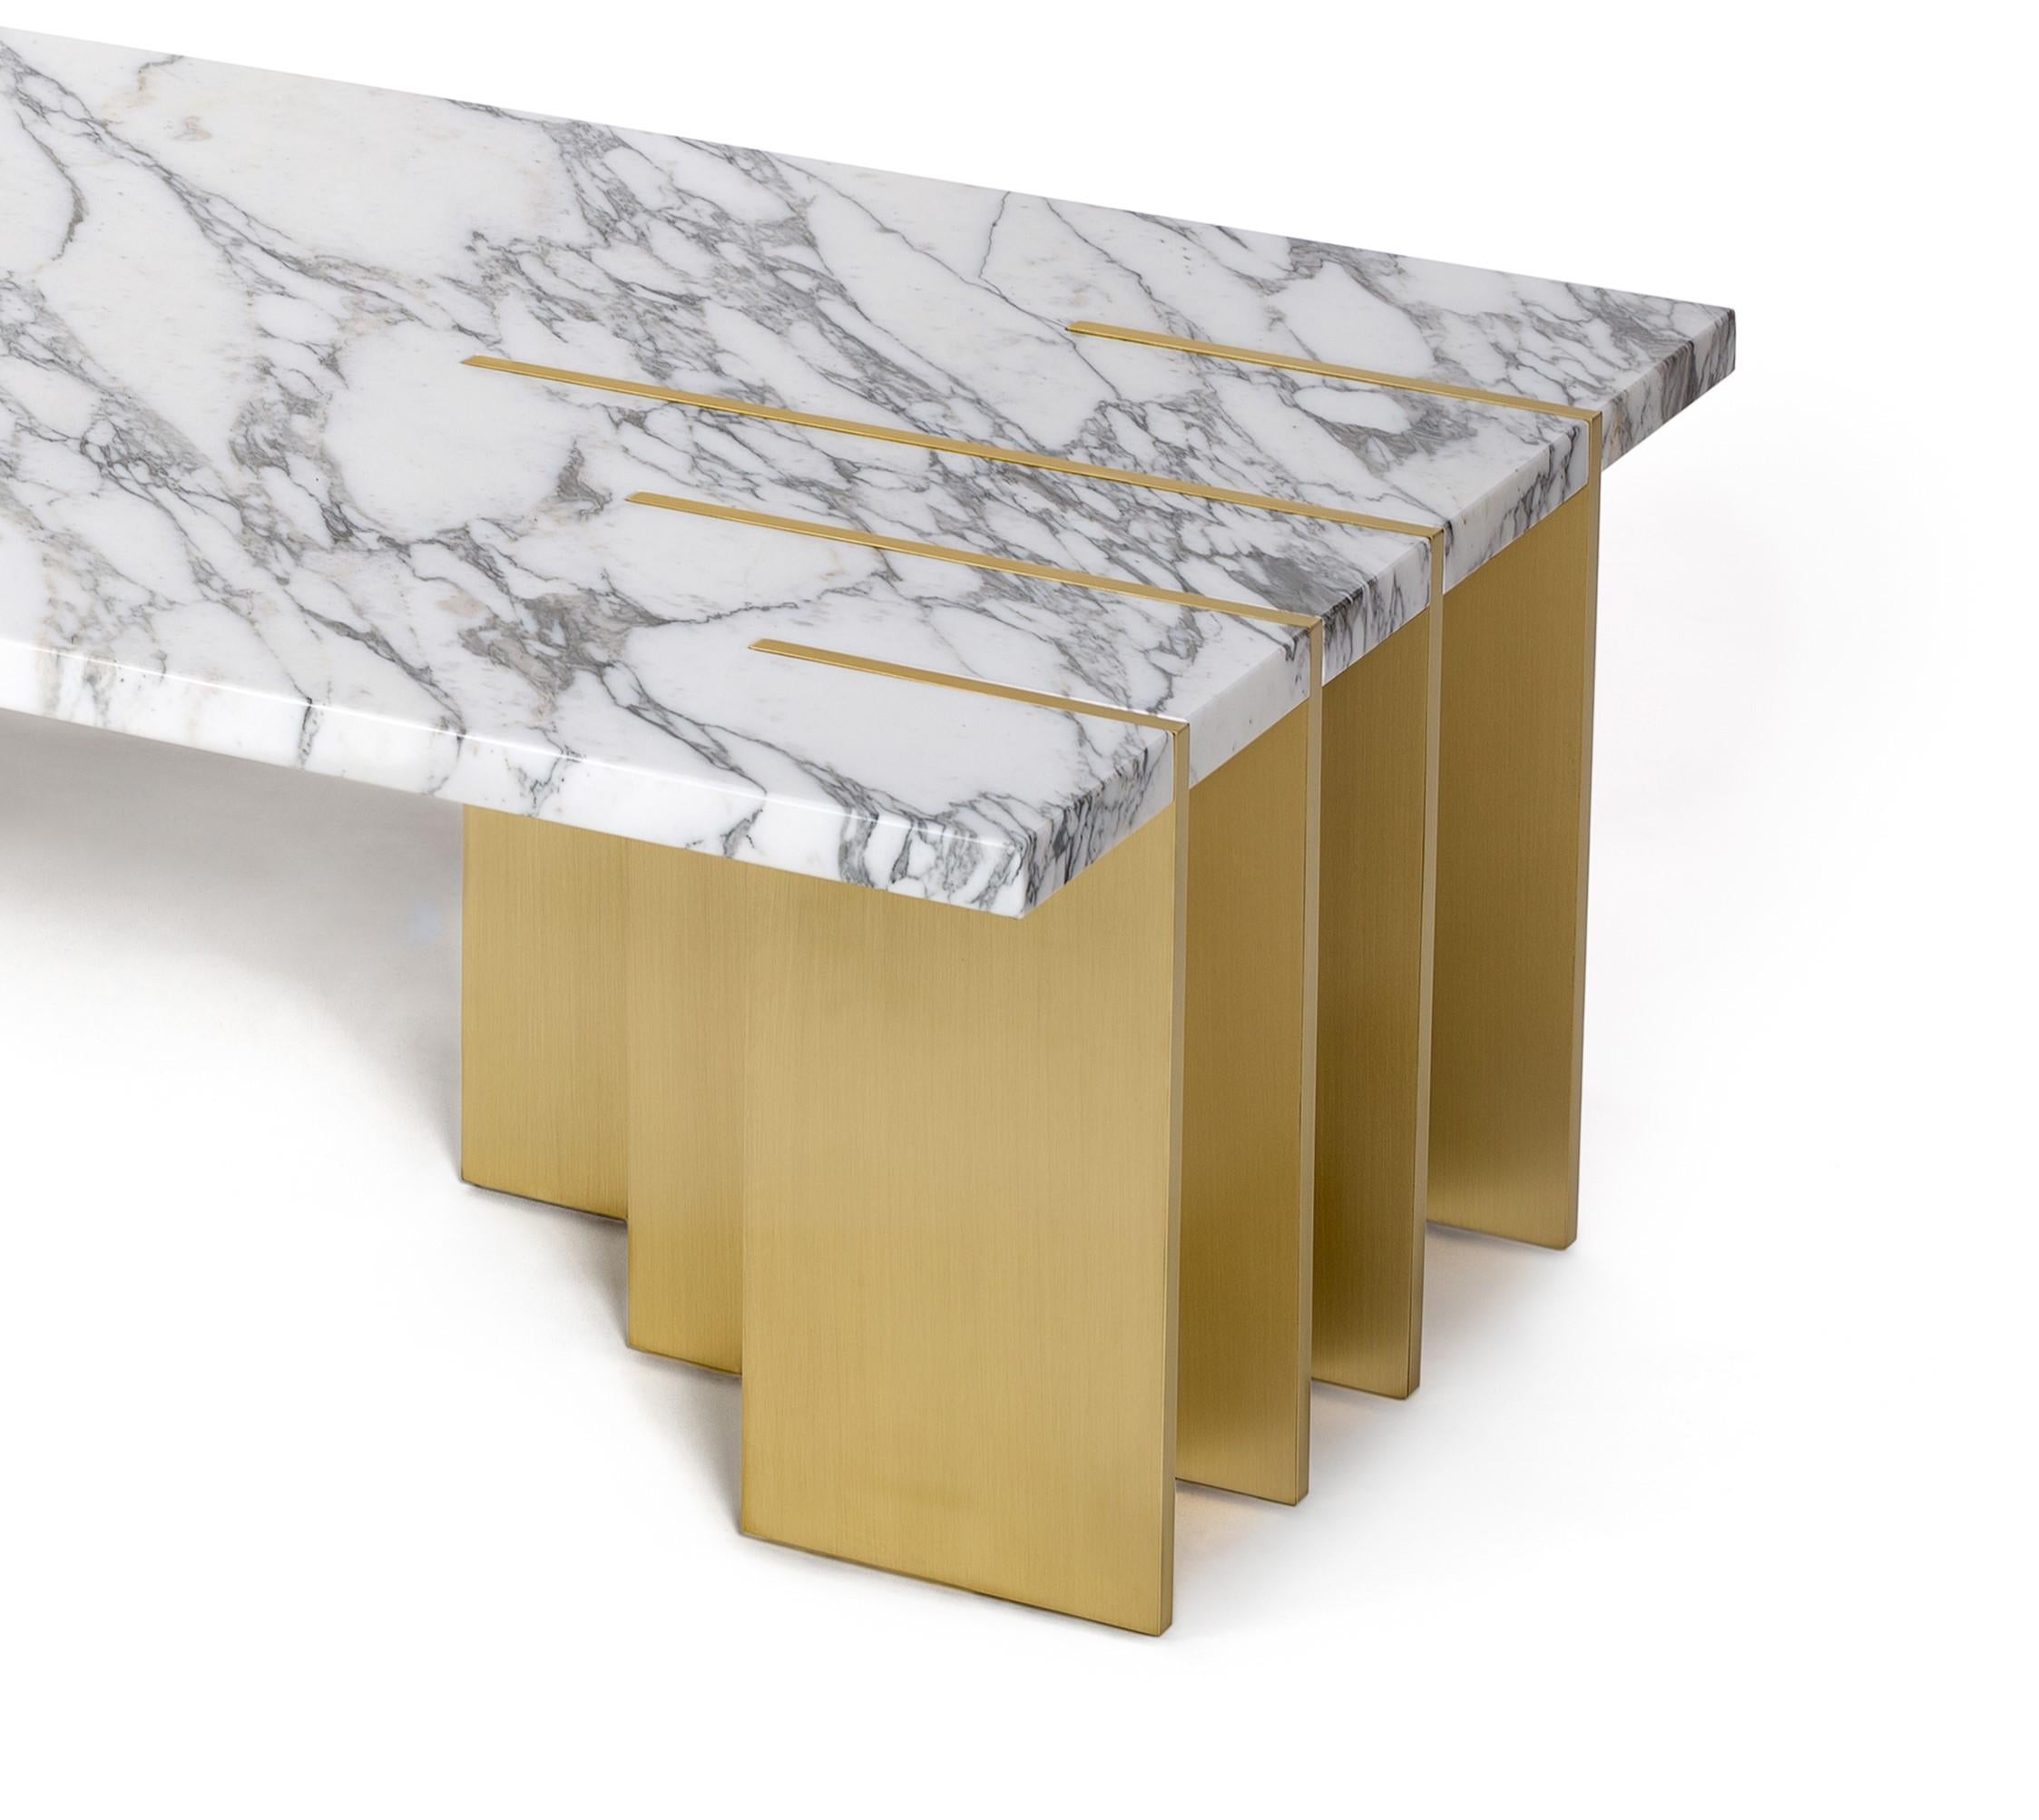 Portuguese Pianist Calacatta Marble Coffee Table by InsidherLand For Sale